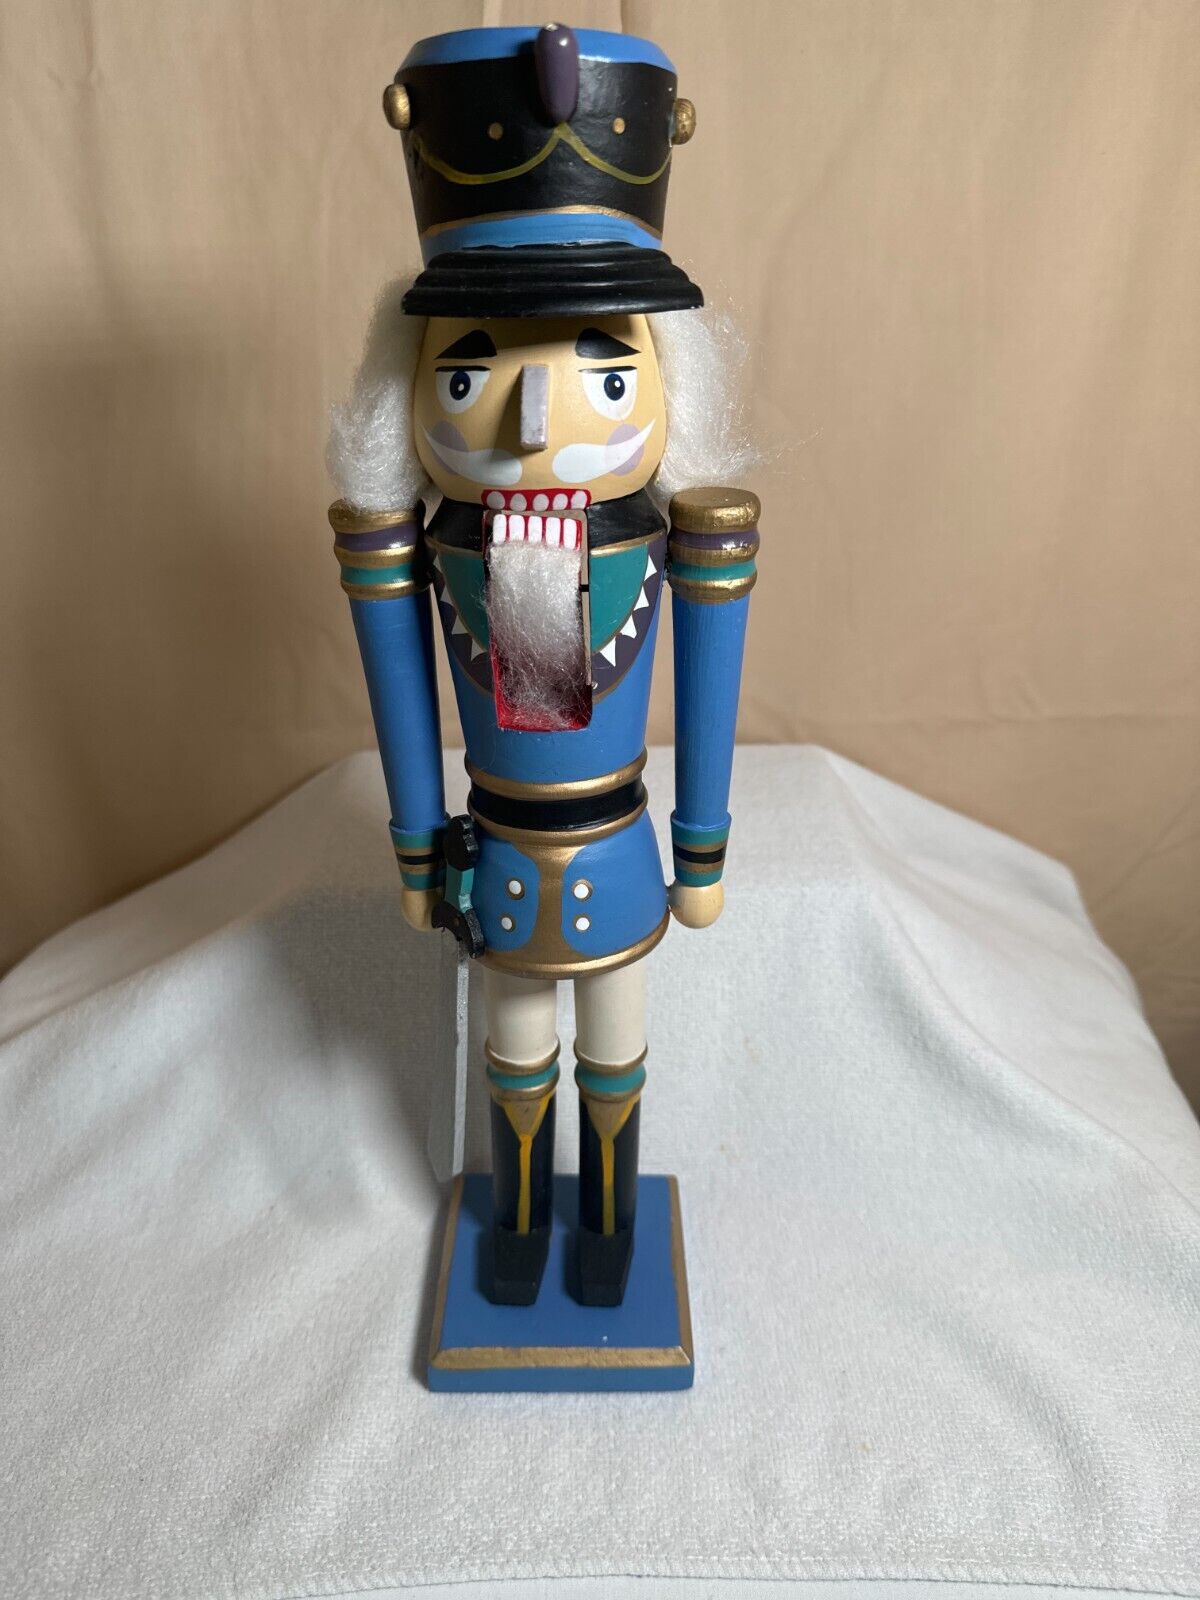 VTG Nutcracker Similar to Those Made in Germany, Blue, Movable Mouth\